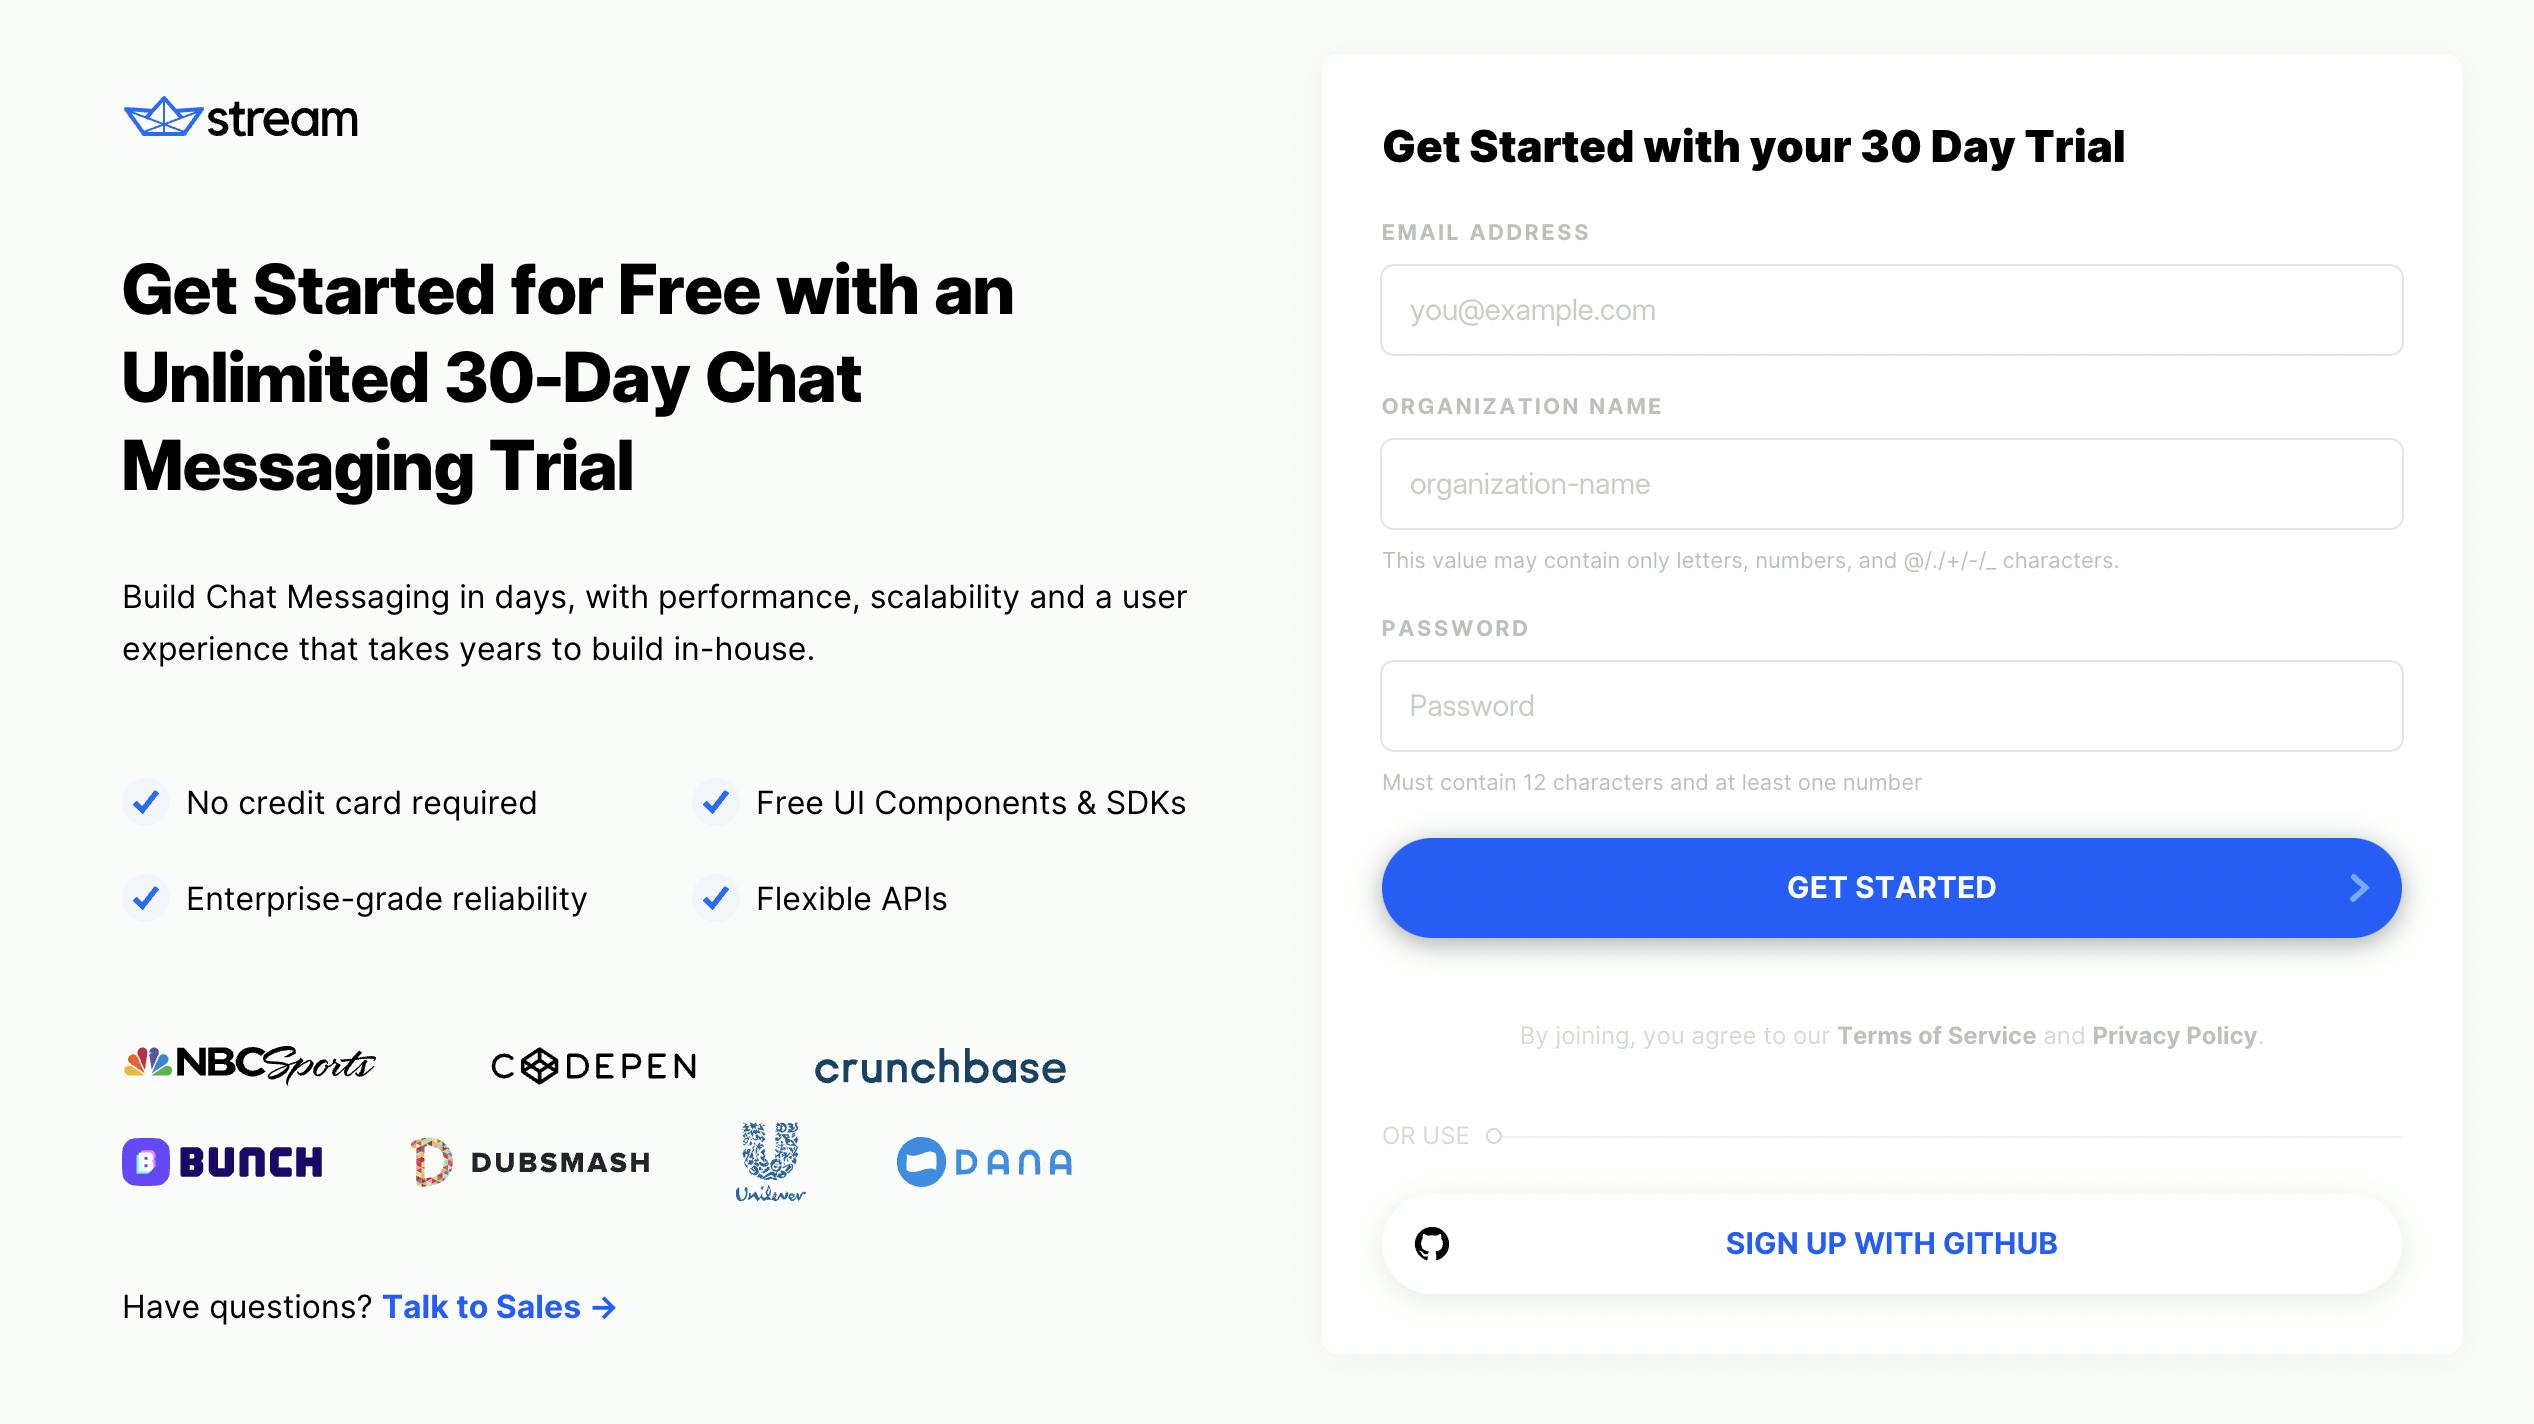 Stream Get Started 30-day trial landing page.